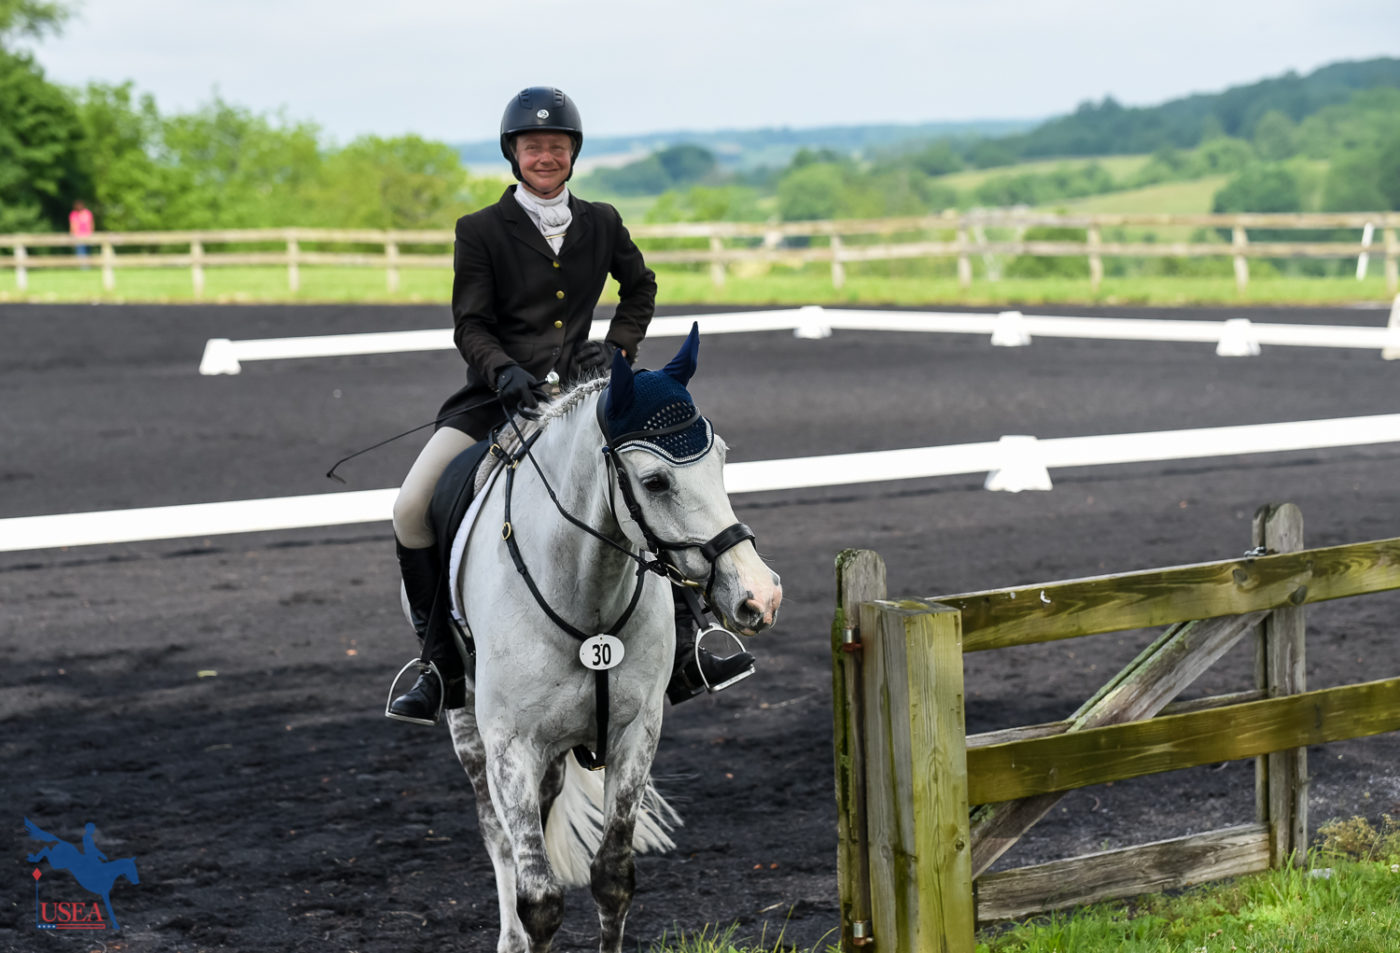 Plenty of smiling faces to be seen, even in the dressage arena! USEA/Jessica Duffy Photo.